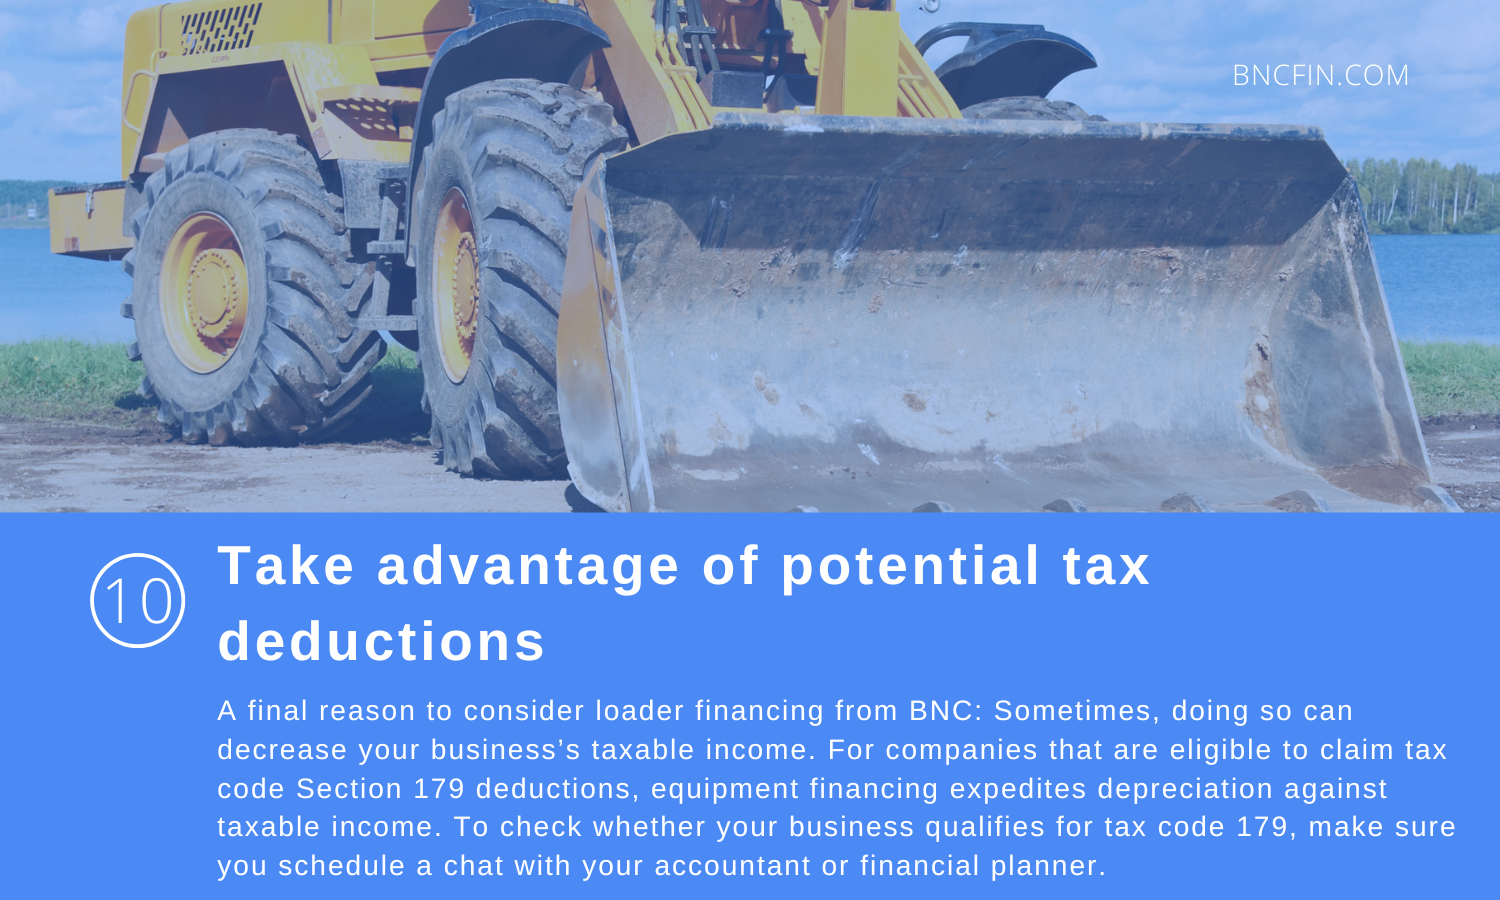 Take advantage of potential deductions.